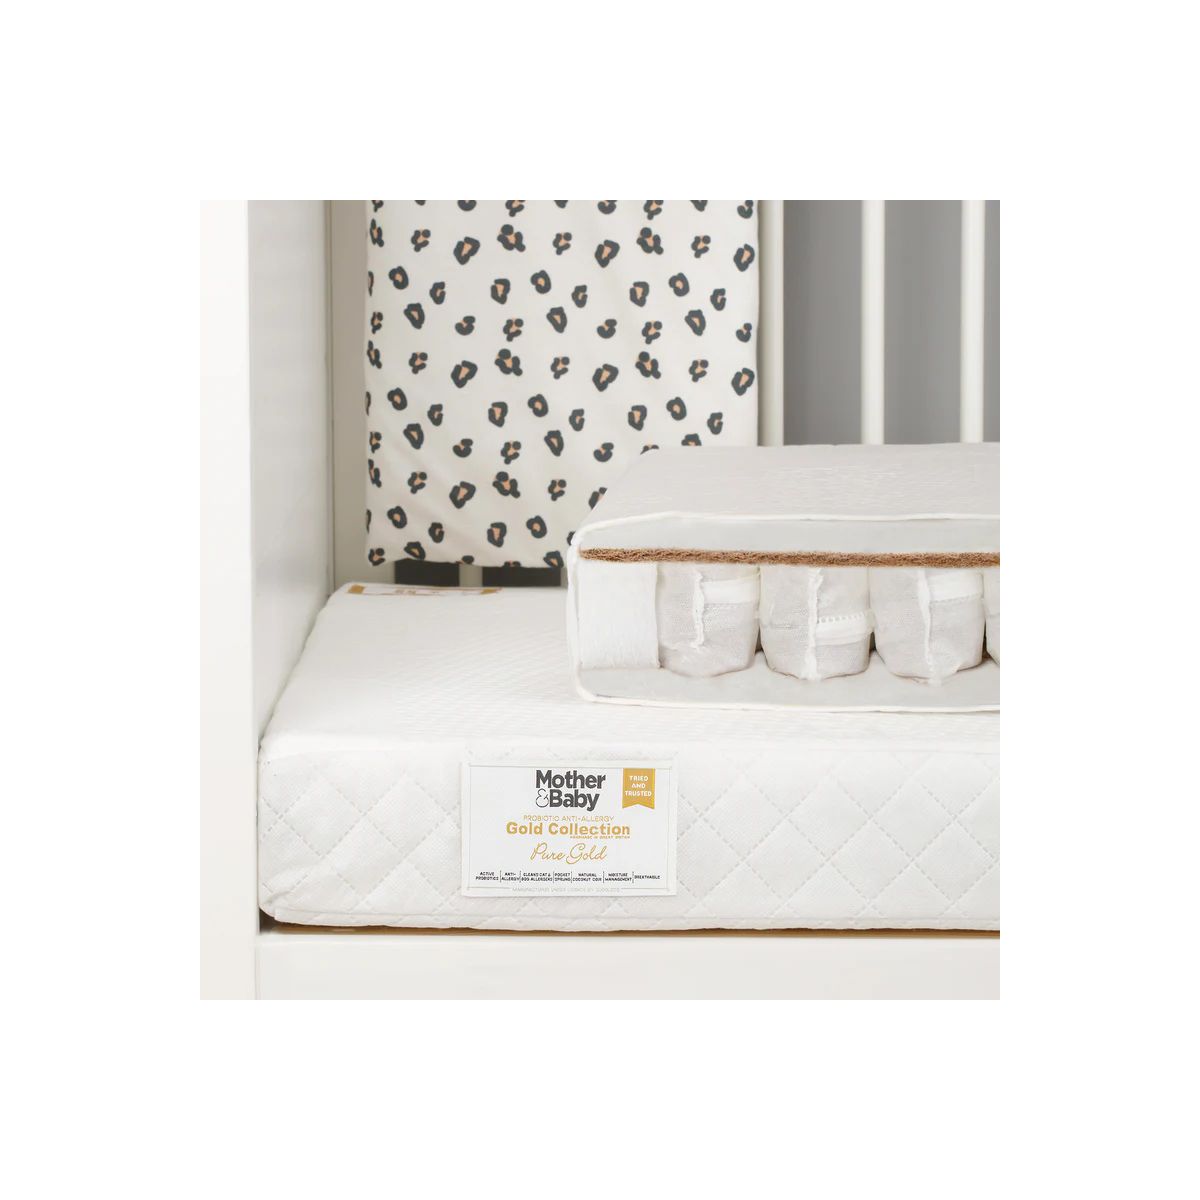 Mother & Baby Pure Gold Anti Allergy Coir Pocket Cot Bed Mattress